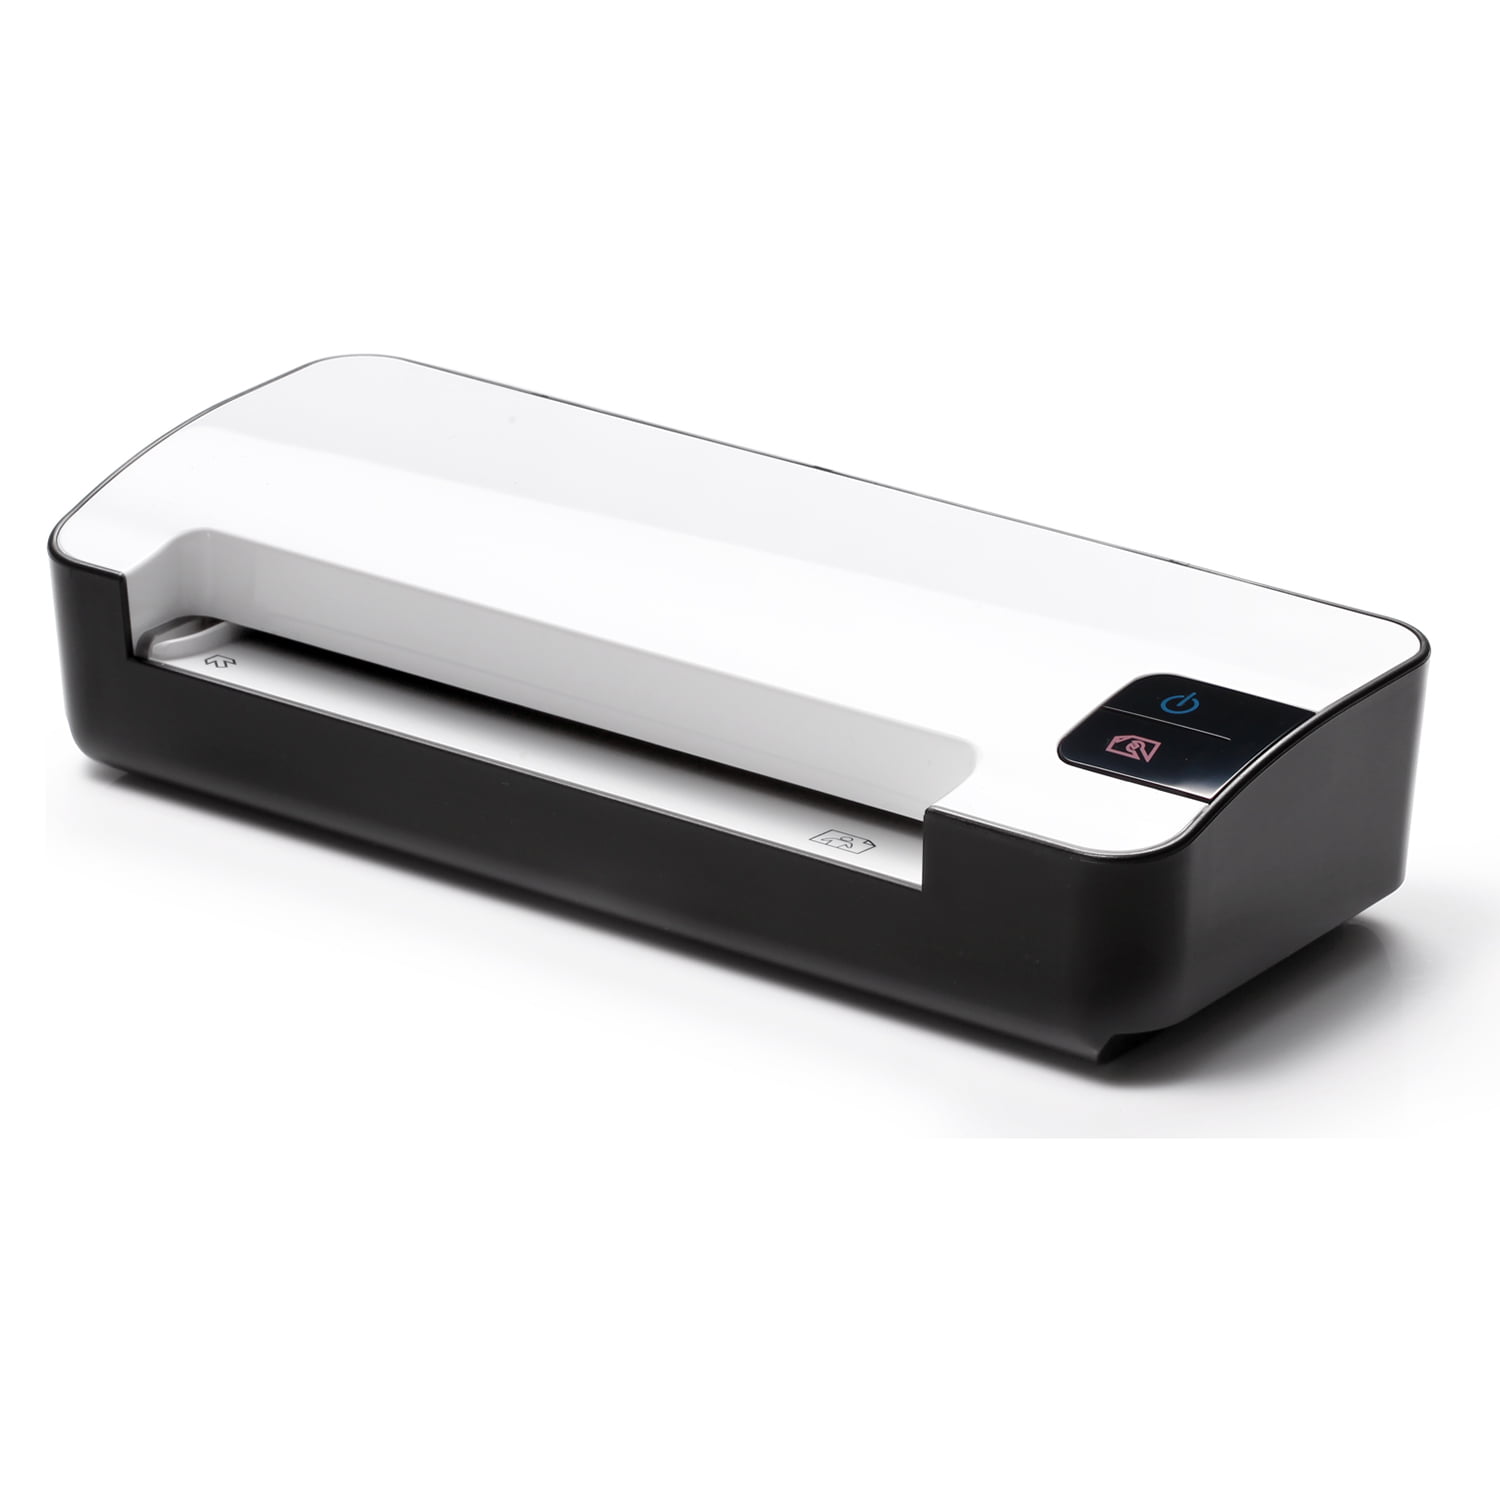 Scan to USB Drive Avision Is15 Portable Scanner for Photos and Cards with 4 Gb SD Card